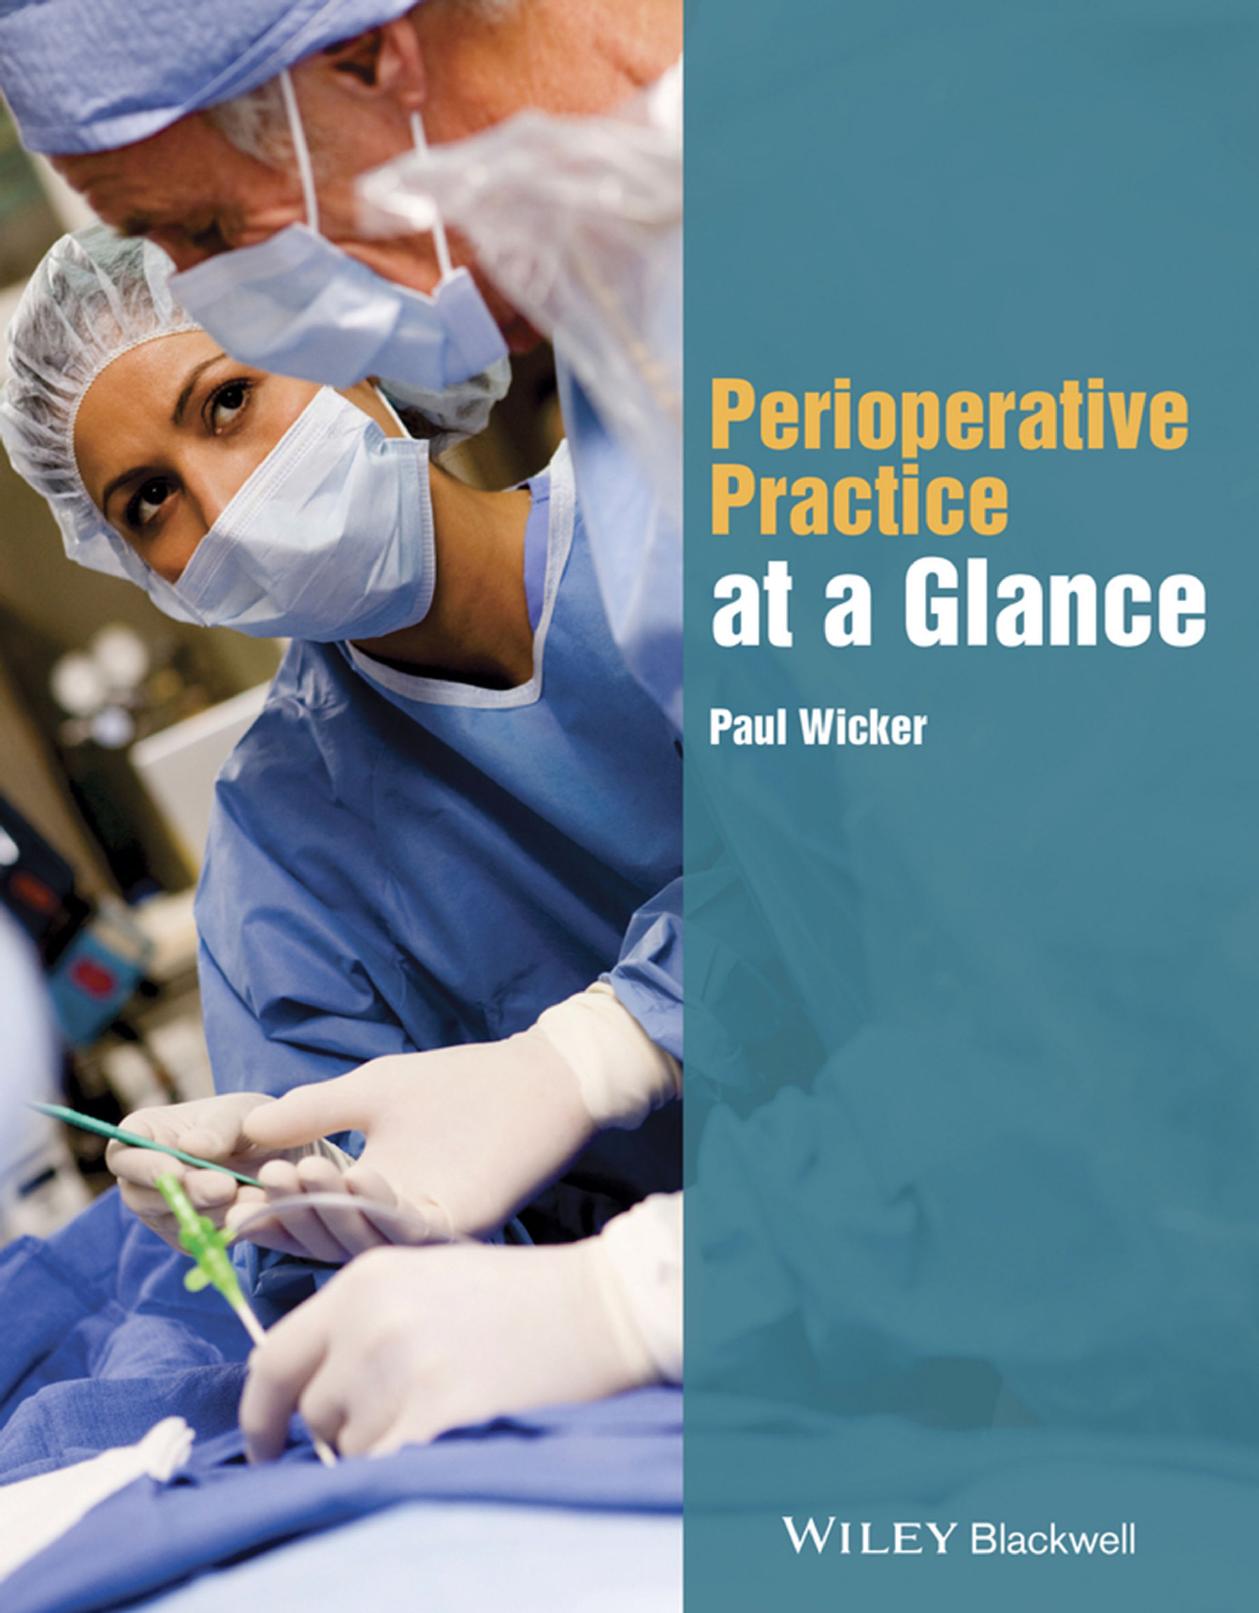 Perioperative Practice at a Glance-Wiley (2015)